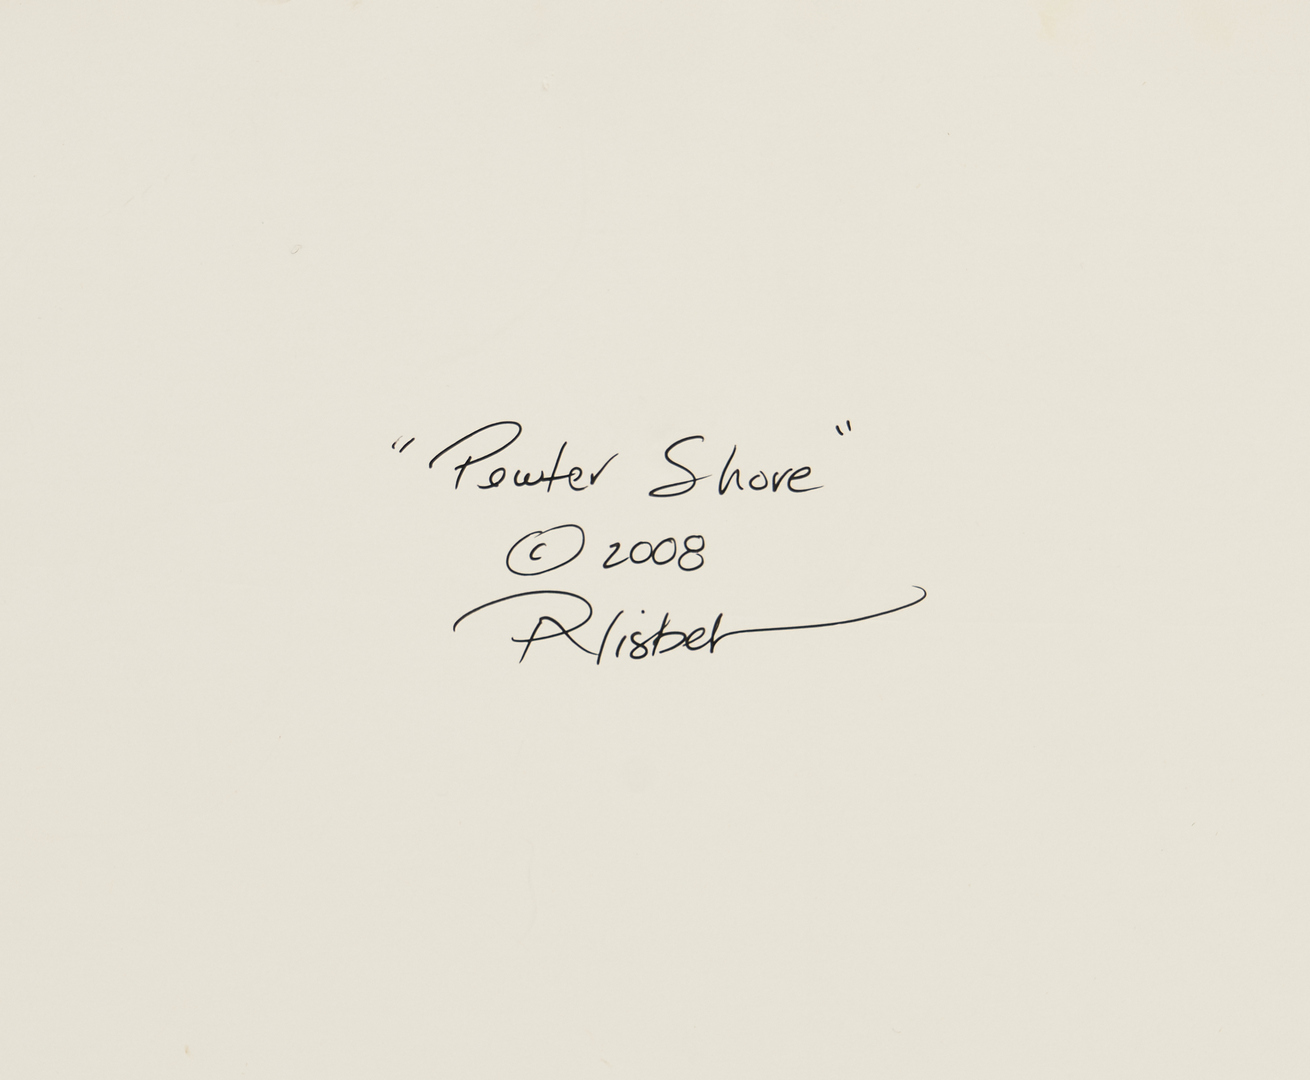 Lot 508: Peter A. Nisbet O/B, Pewter Shore